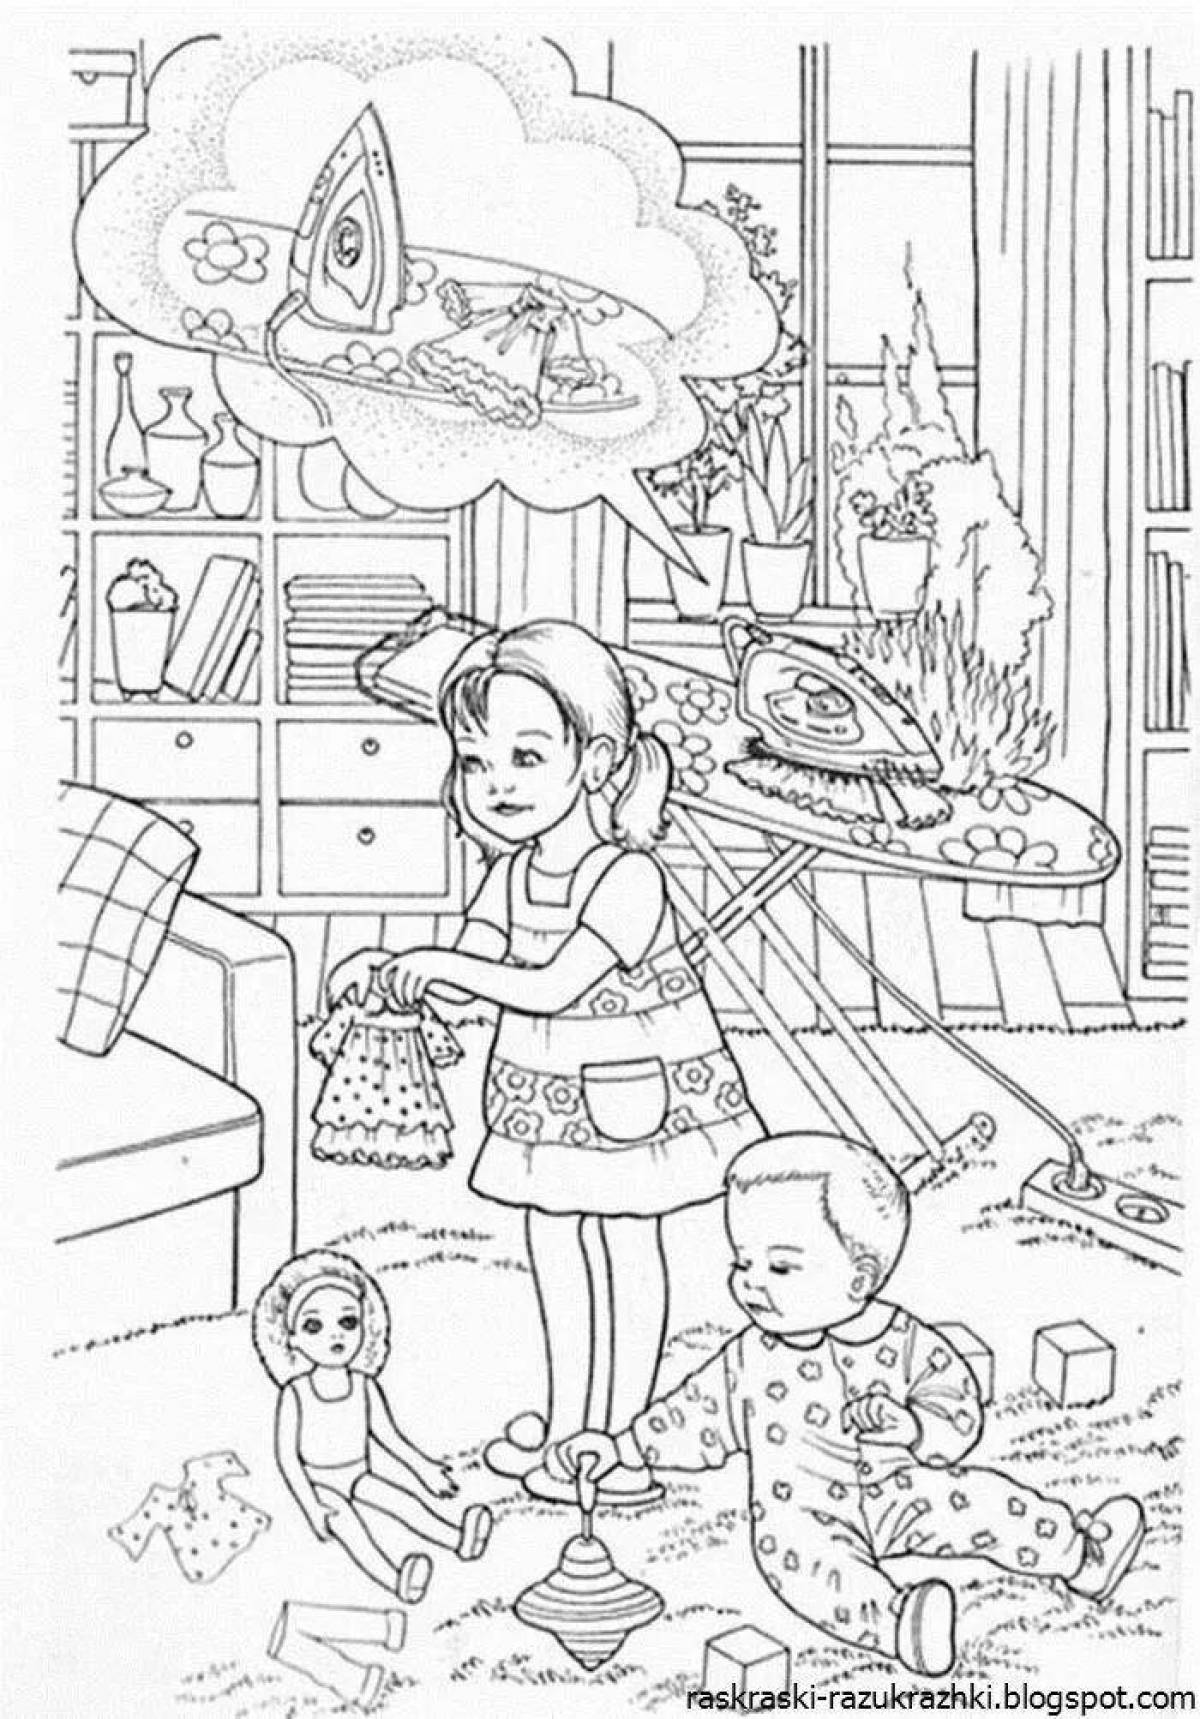 Colorful child safety coloring page